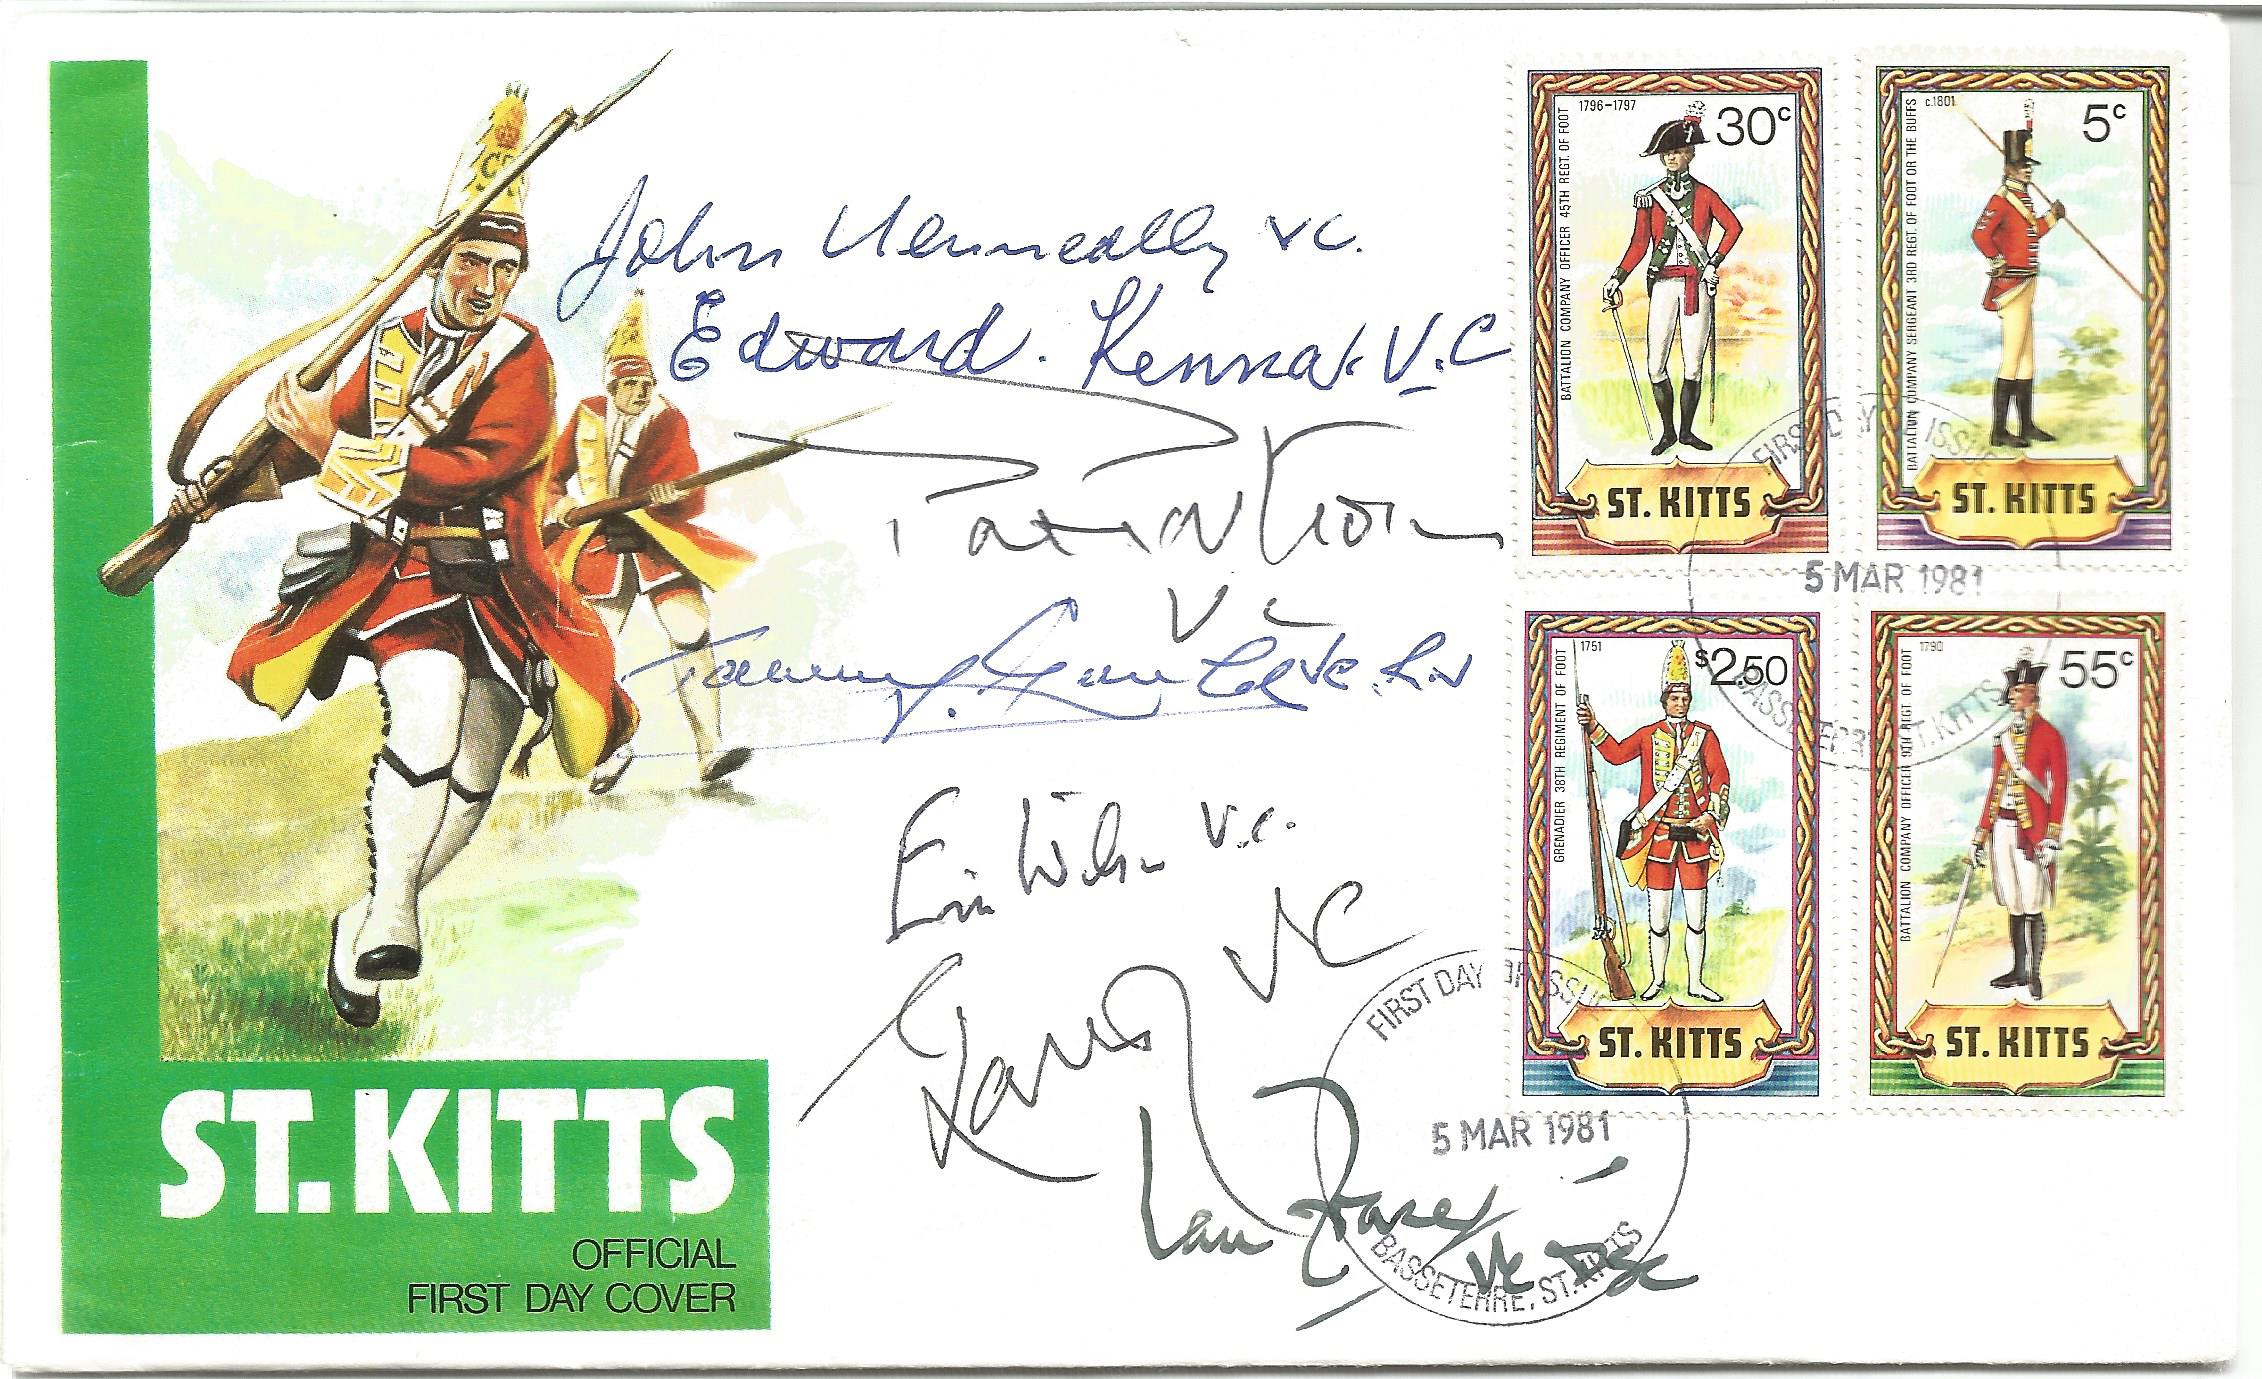 Seven Victoria Cross winners signed 1983 St Kitts Military Uniforms FDC. Signed by G Lama VC, J